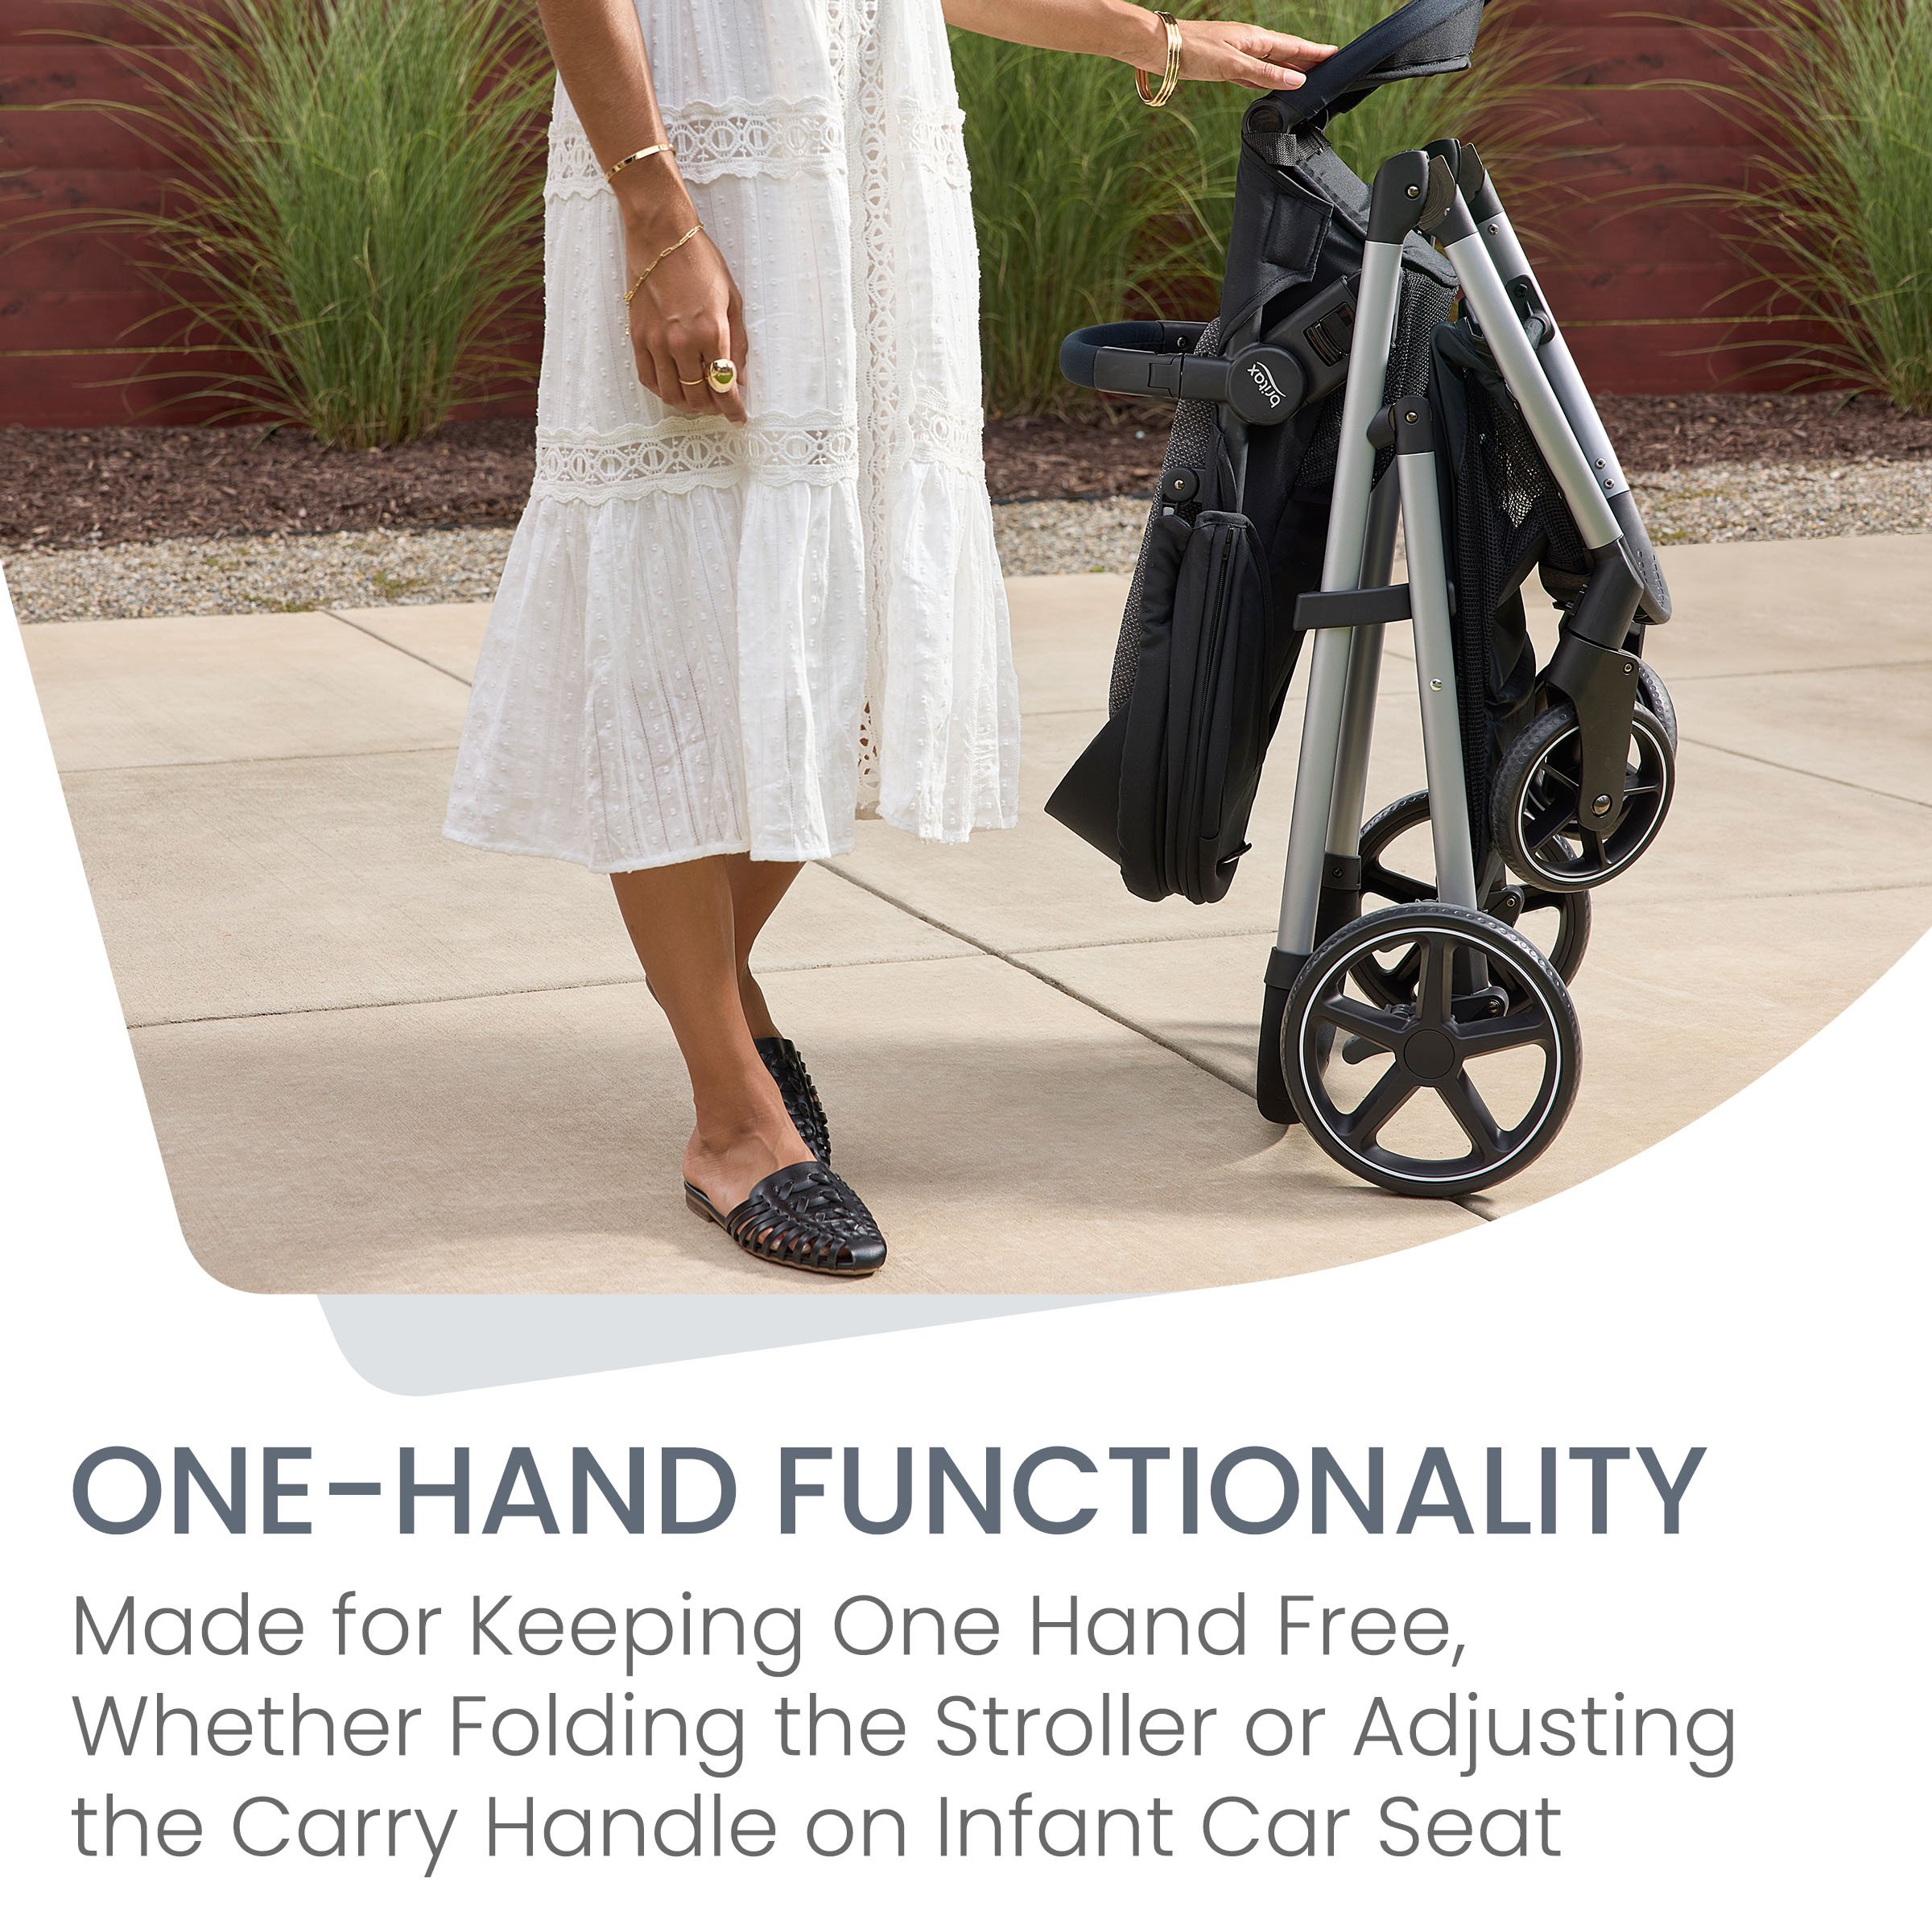 Grove Stroller Folded using One-Hand Functionality